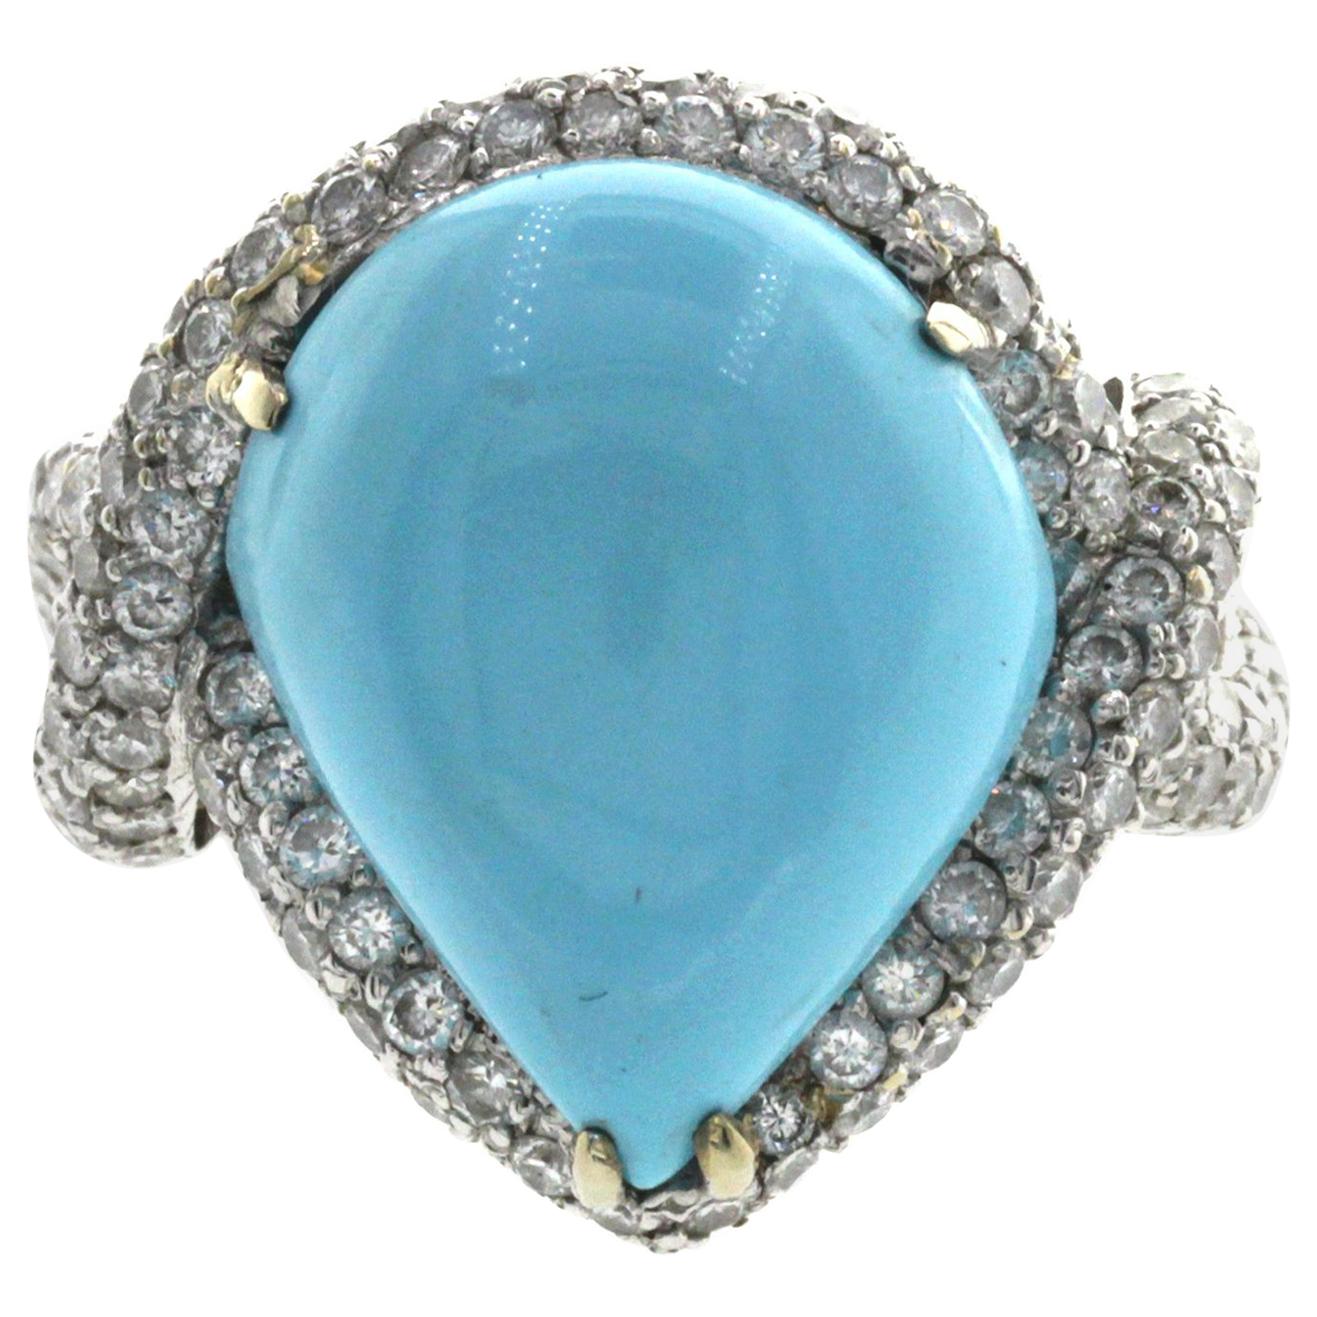 12.14 CT Natural Turquoise & 1.86 CT Diamonds in 18K Gold Cocktail Ring